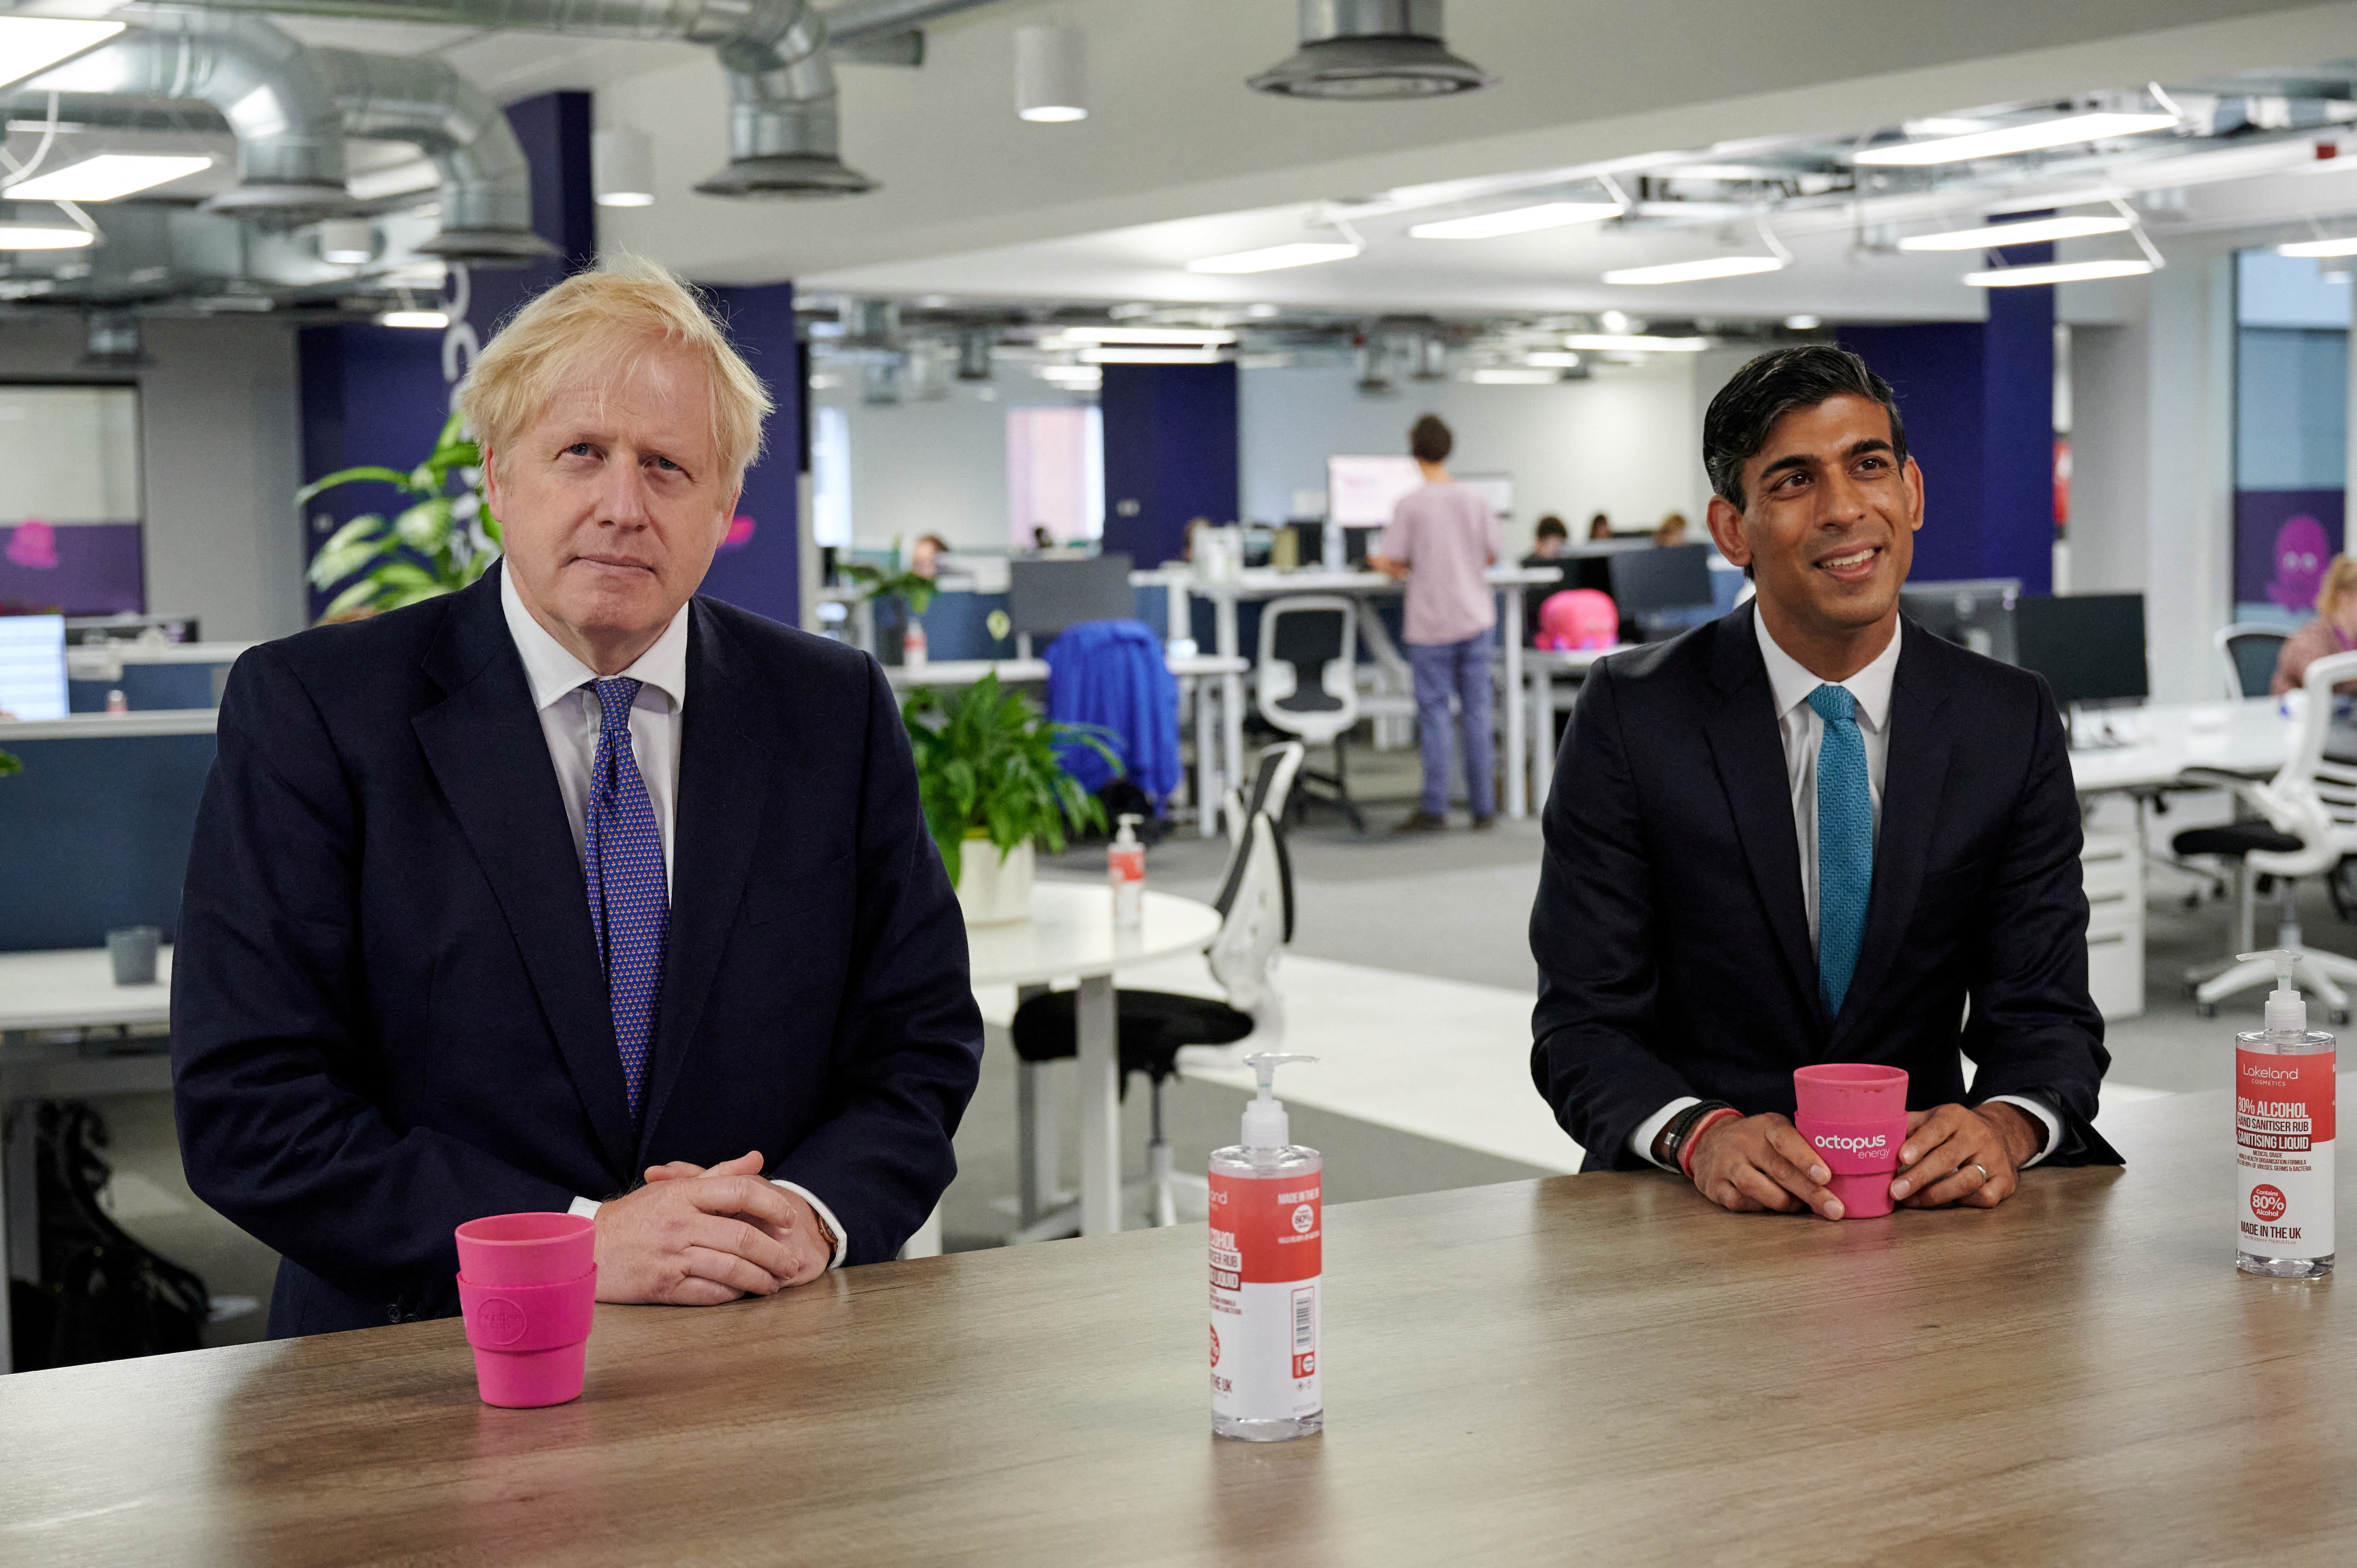 Britain's PM Johnson and Chancellor of the Exchequer Sunak visit Octopus Energy, in London